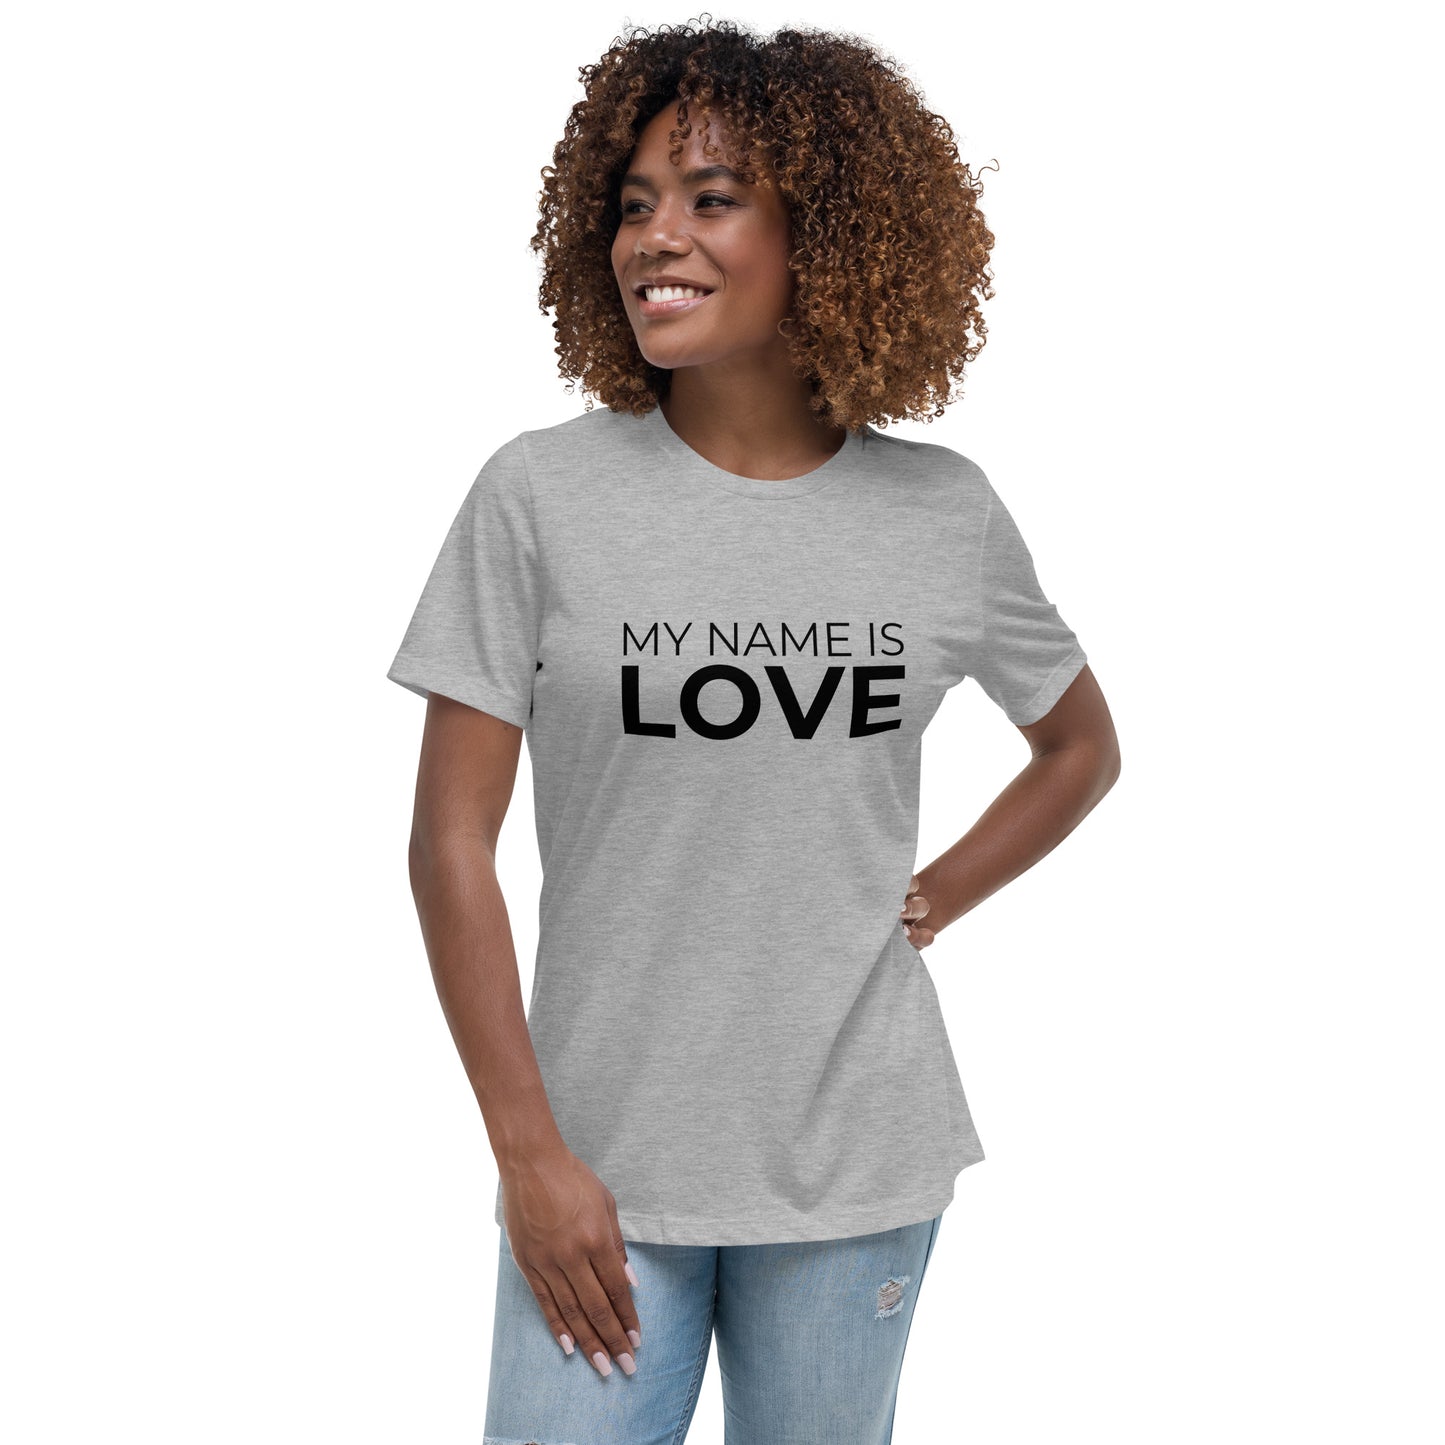 My Name Is Love: Women's Relaxed T-Shirt